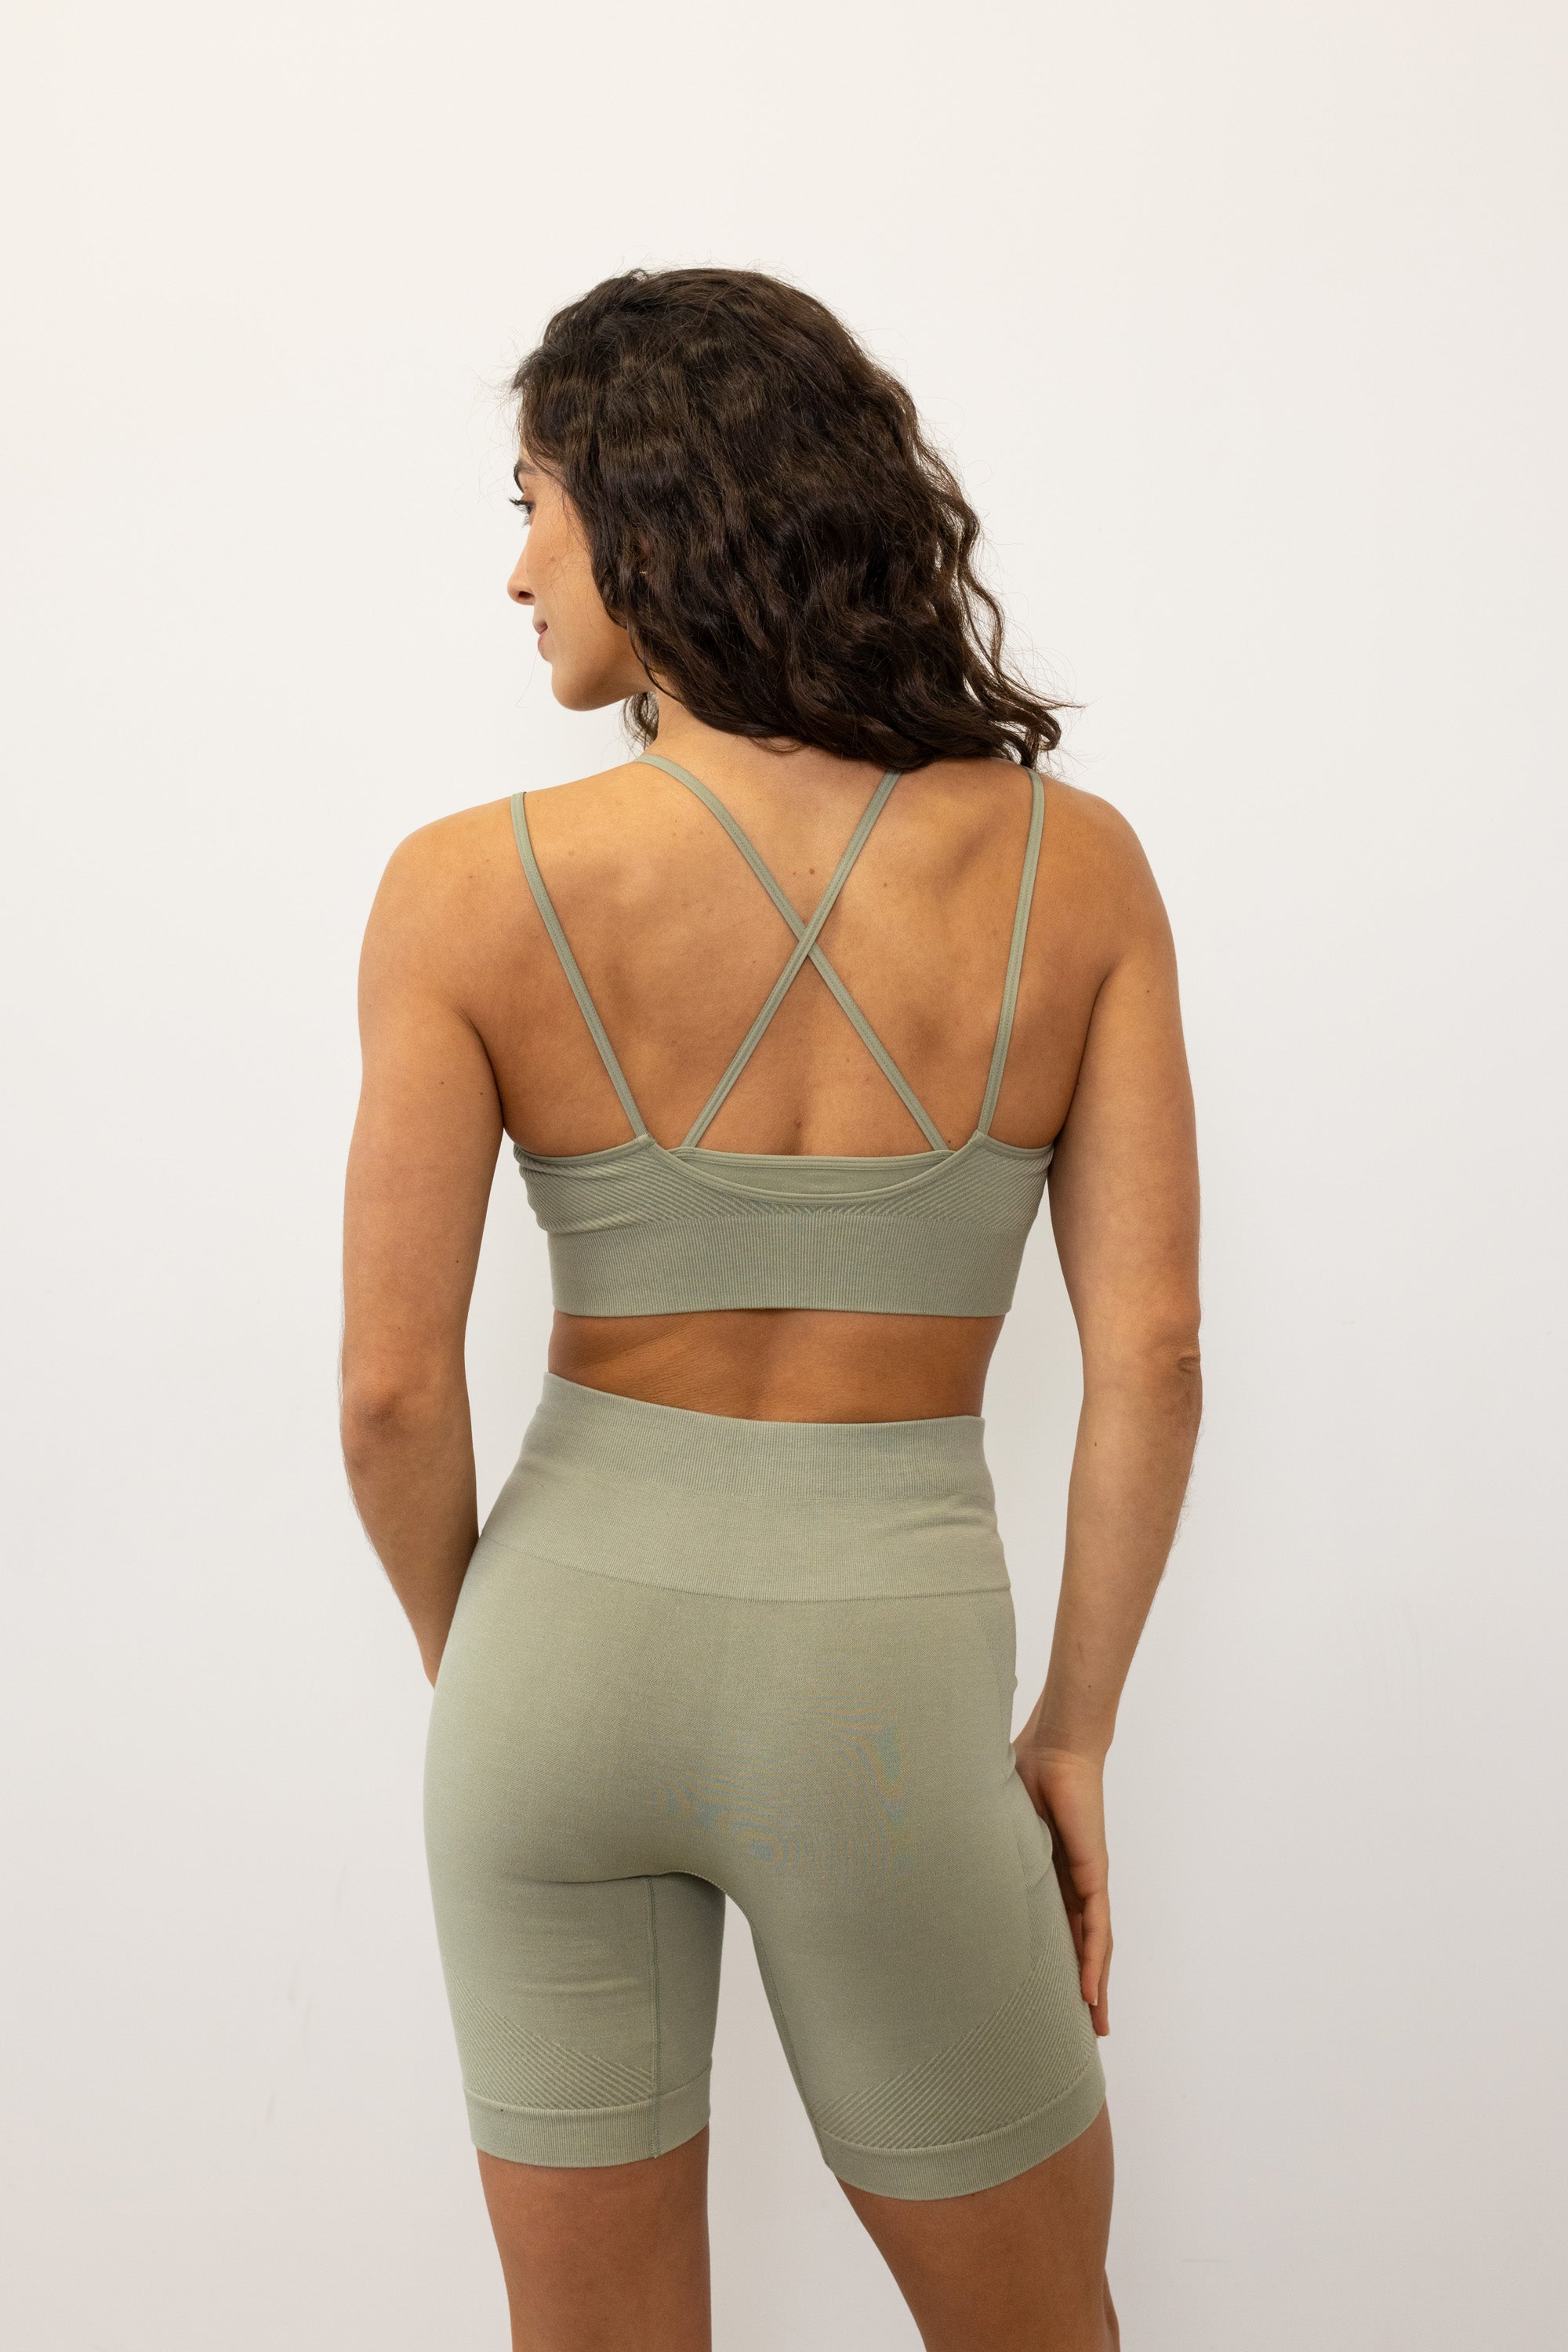 Introducing our Mandala Modal Yoga Bra crafted for style and comfort in low impact workouts. With a feminine double layered design, crossover straps, and textured detail, it offers both fashion and function. Seamlessly knitted in soft Lenzing Modal fabric, recycled polyamide, and elastane, it provides flexible support for yoga, pilates, and barre. With light support, triple-layered fabric, and removable pads, it ensures comfort and customization.